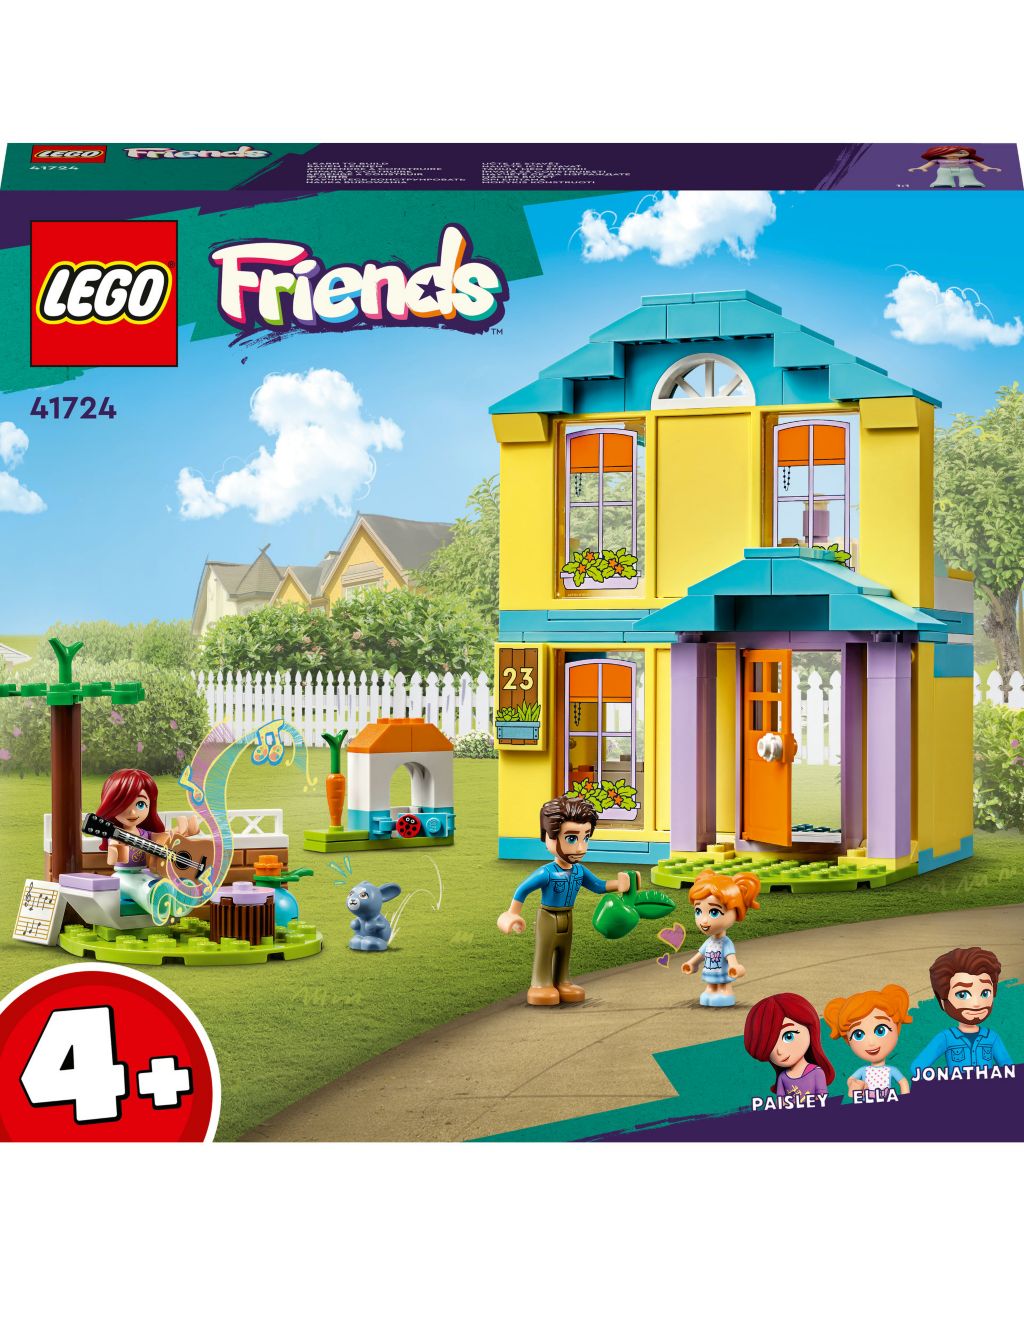 LEGO Friends Paisley's House Dolls House Set 41724 (4+ Yrs) 2 of 6